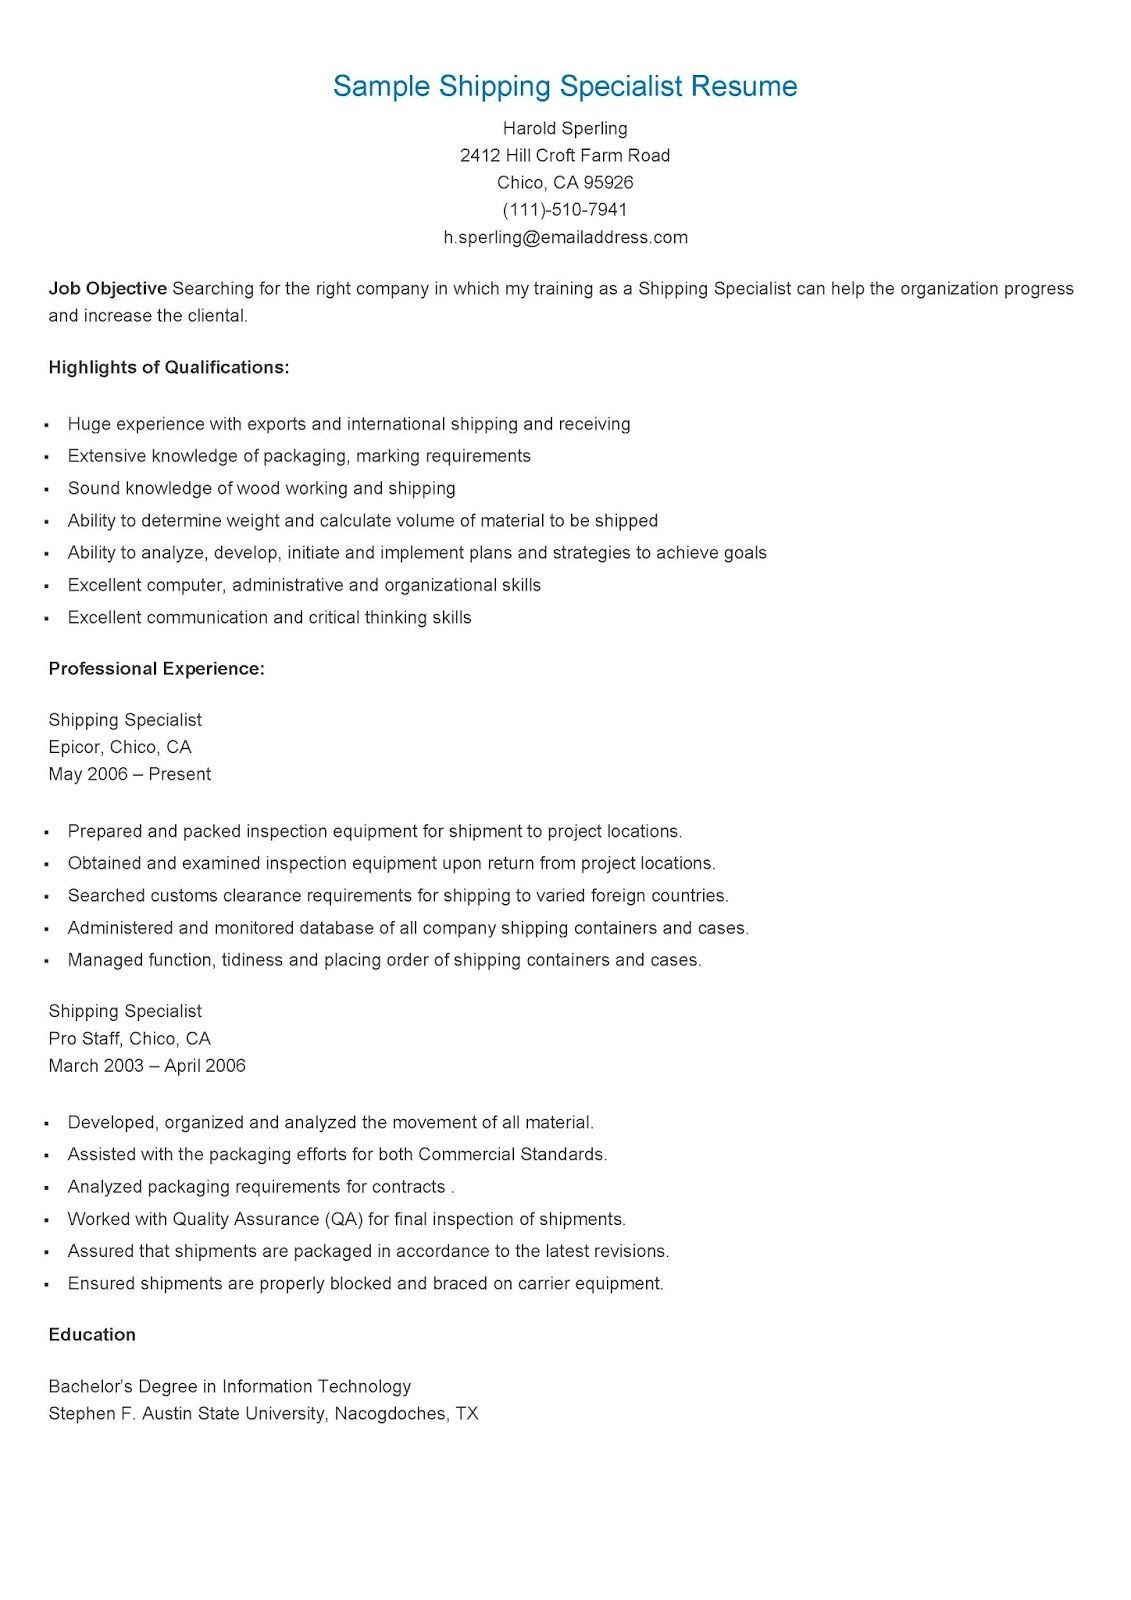 Sample Resume for Shipper and Receiver Sample Shipping Specialist Resume Resume, Sample Resume, Resume …